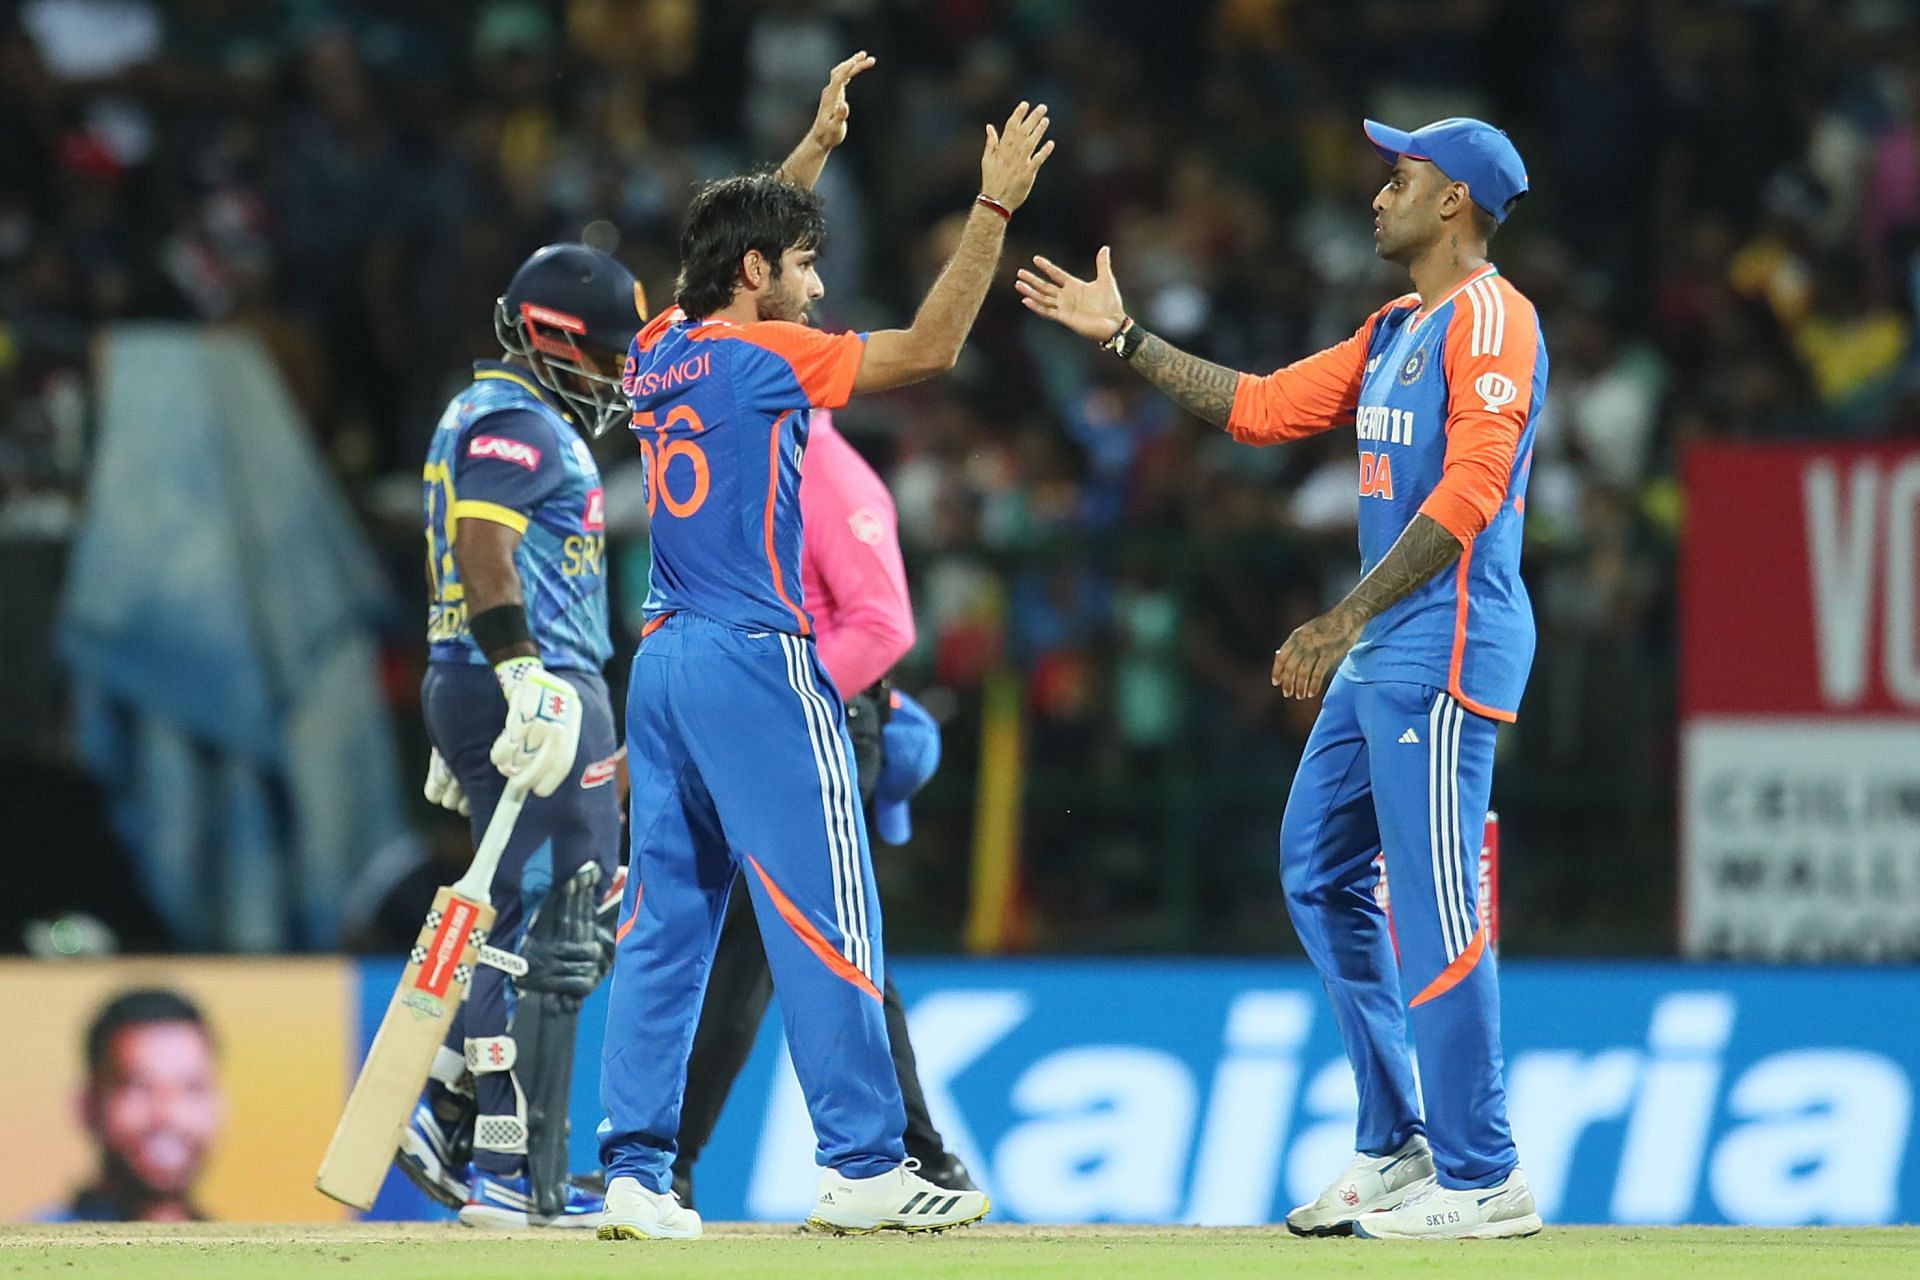 Sri Lanka vs India, 3rd T20I: Probable XI, Match Prediction, Pitch Report, Weather Forecast, and Live Streaming Details